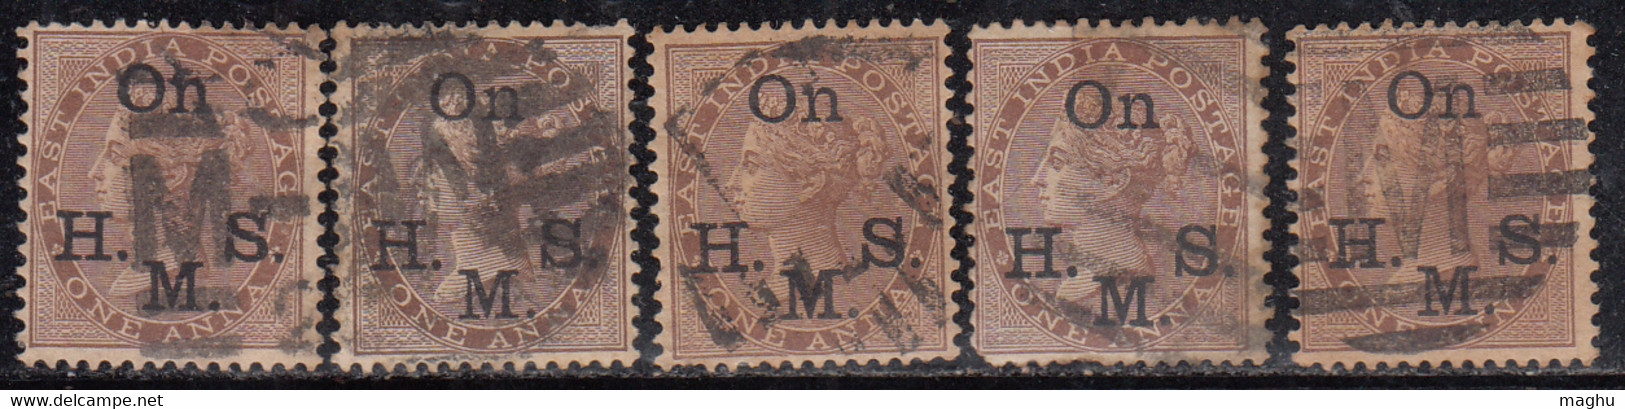 1a X 5 Diff., Shades Varities, British East India Used On H.M.S. Service, 1874, One Anna, Official. - 1854 East India Company Administration